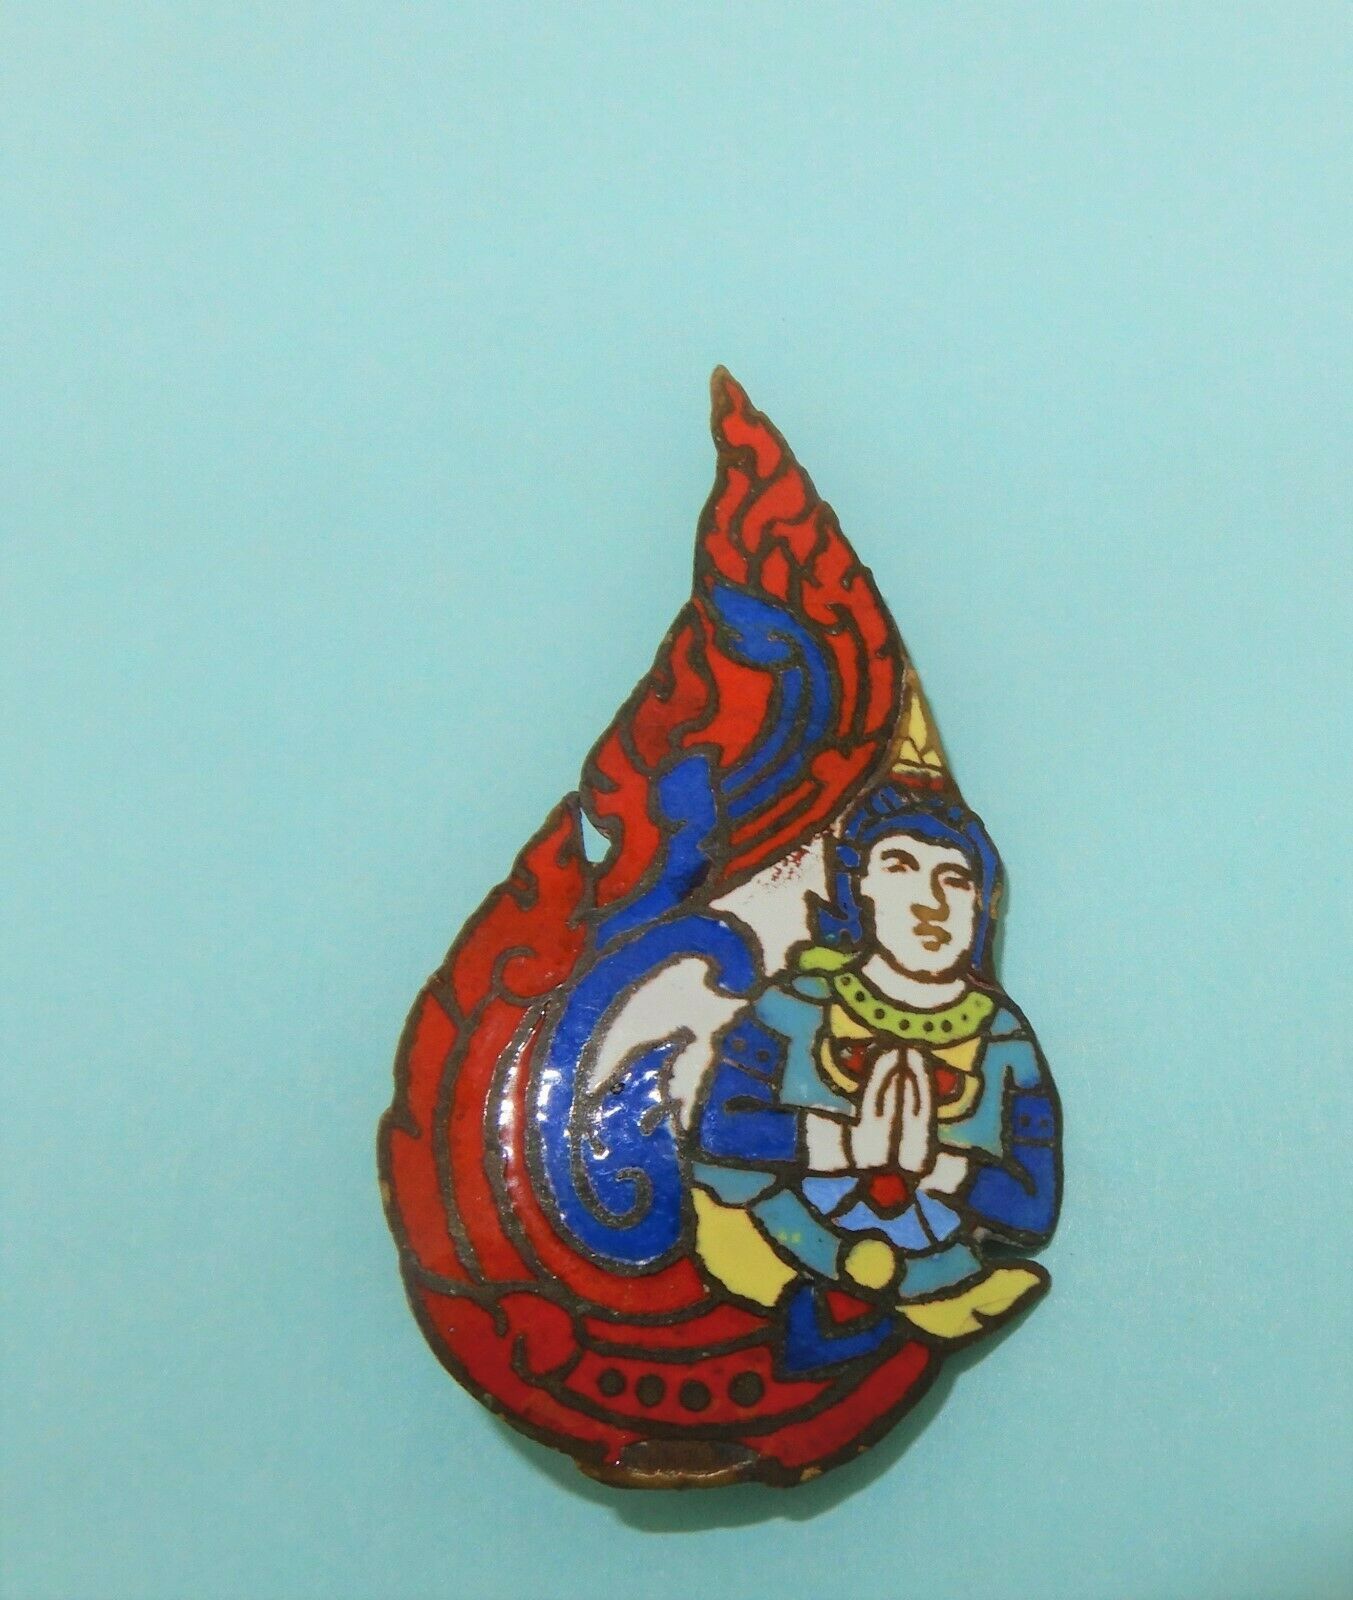 Primary image for Unique vintage enamel over metal stain glass look medieval knight brooch